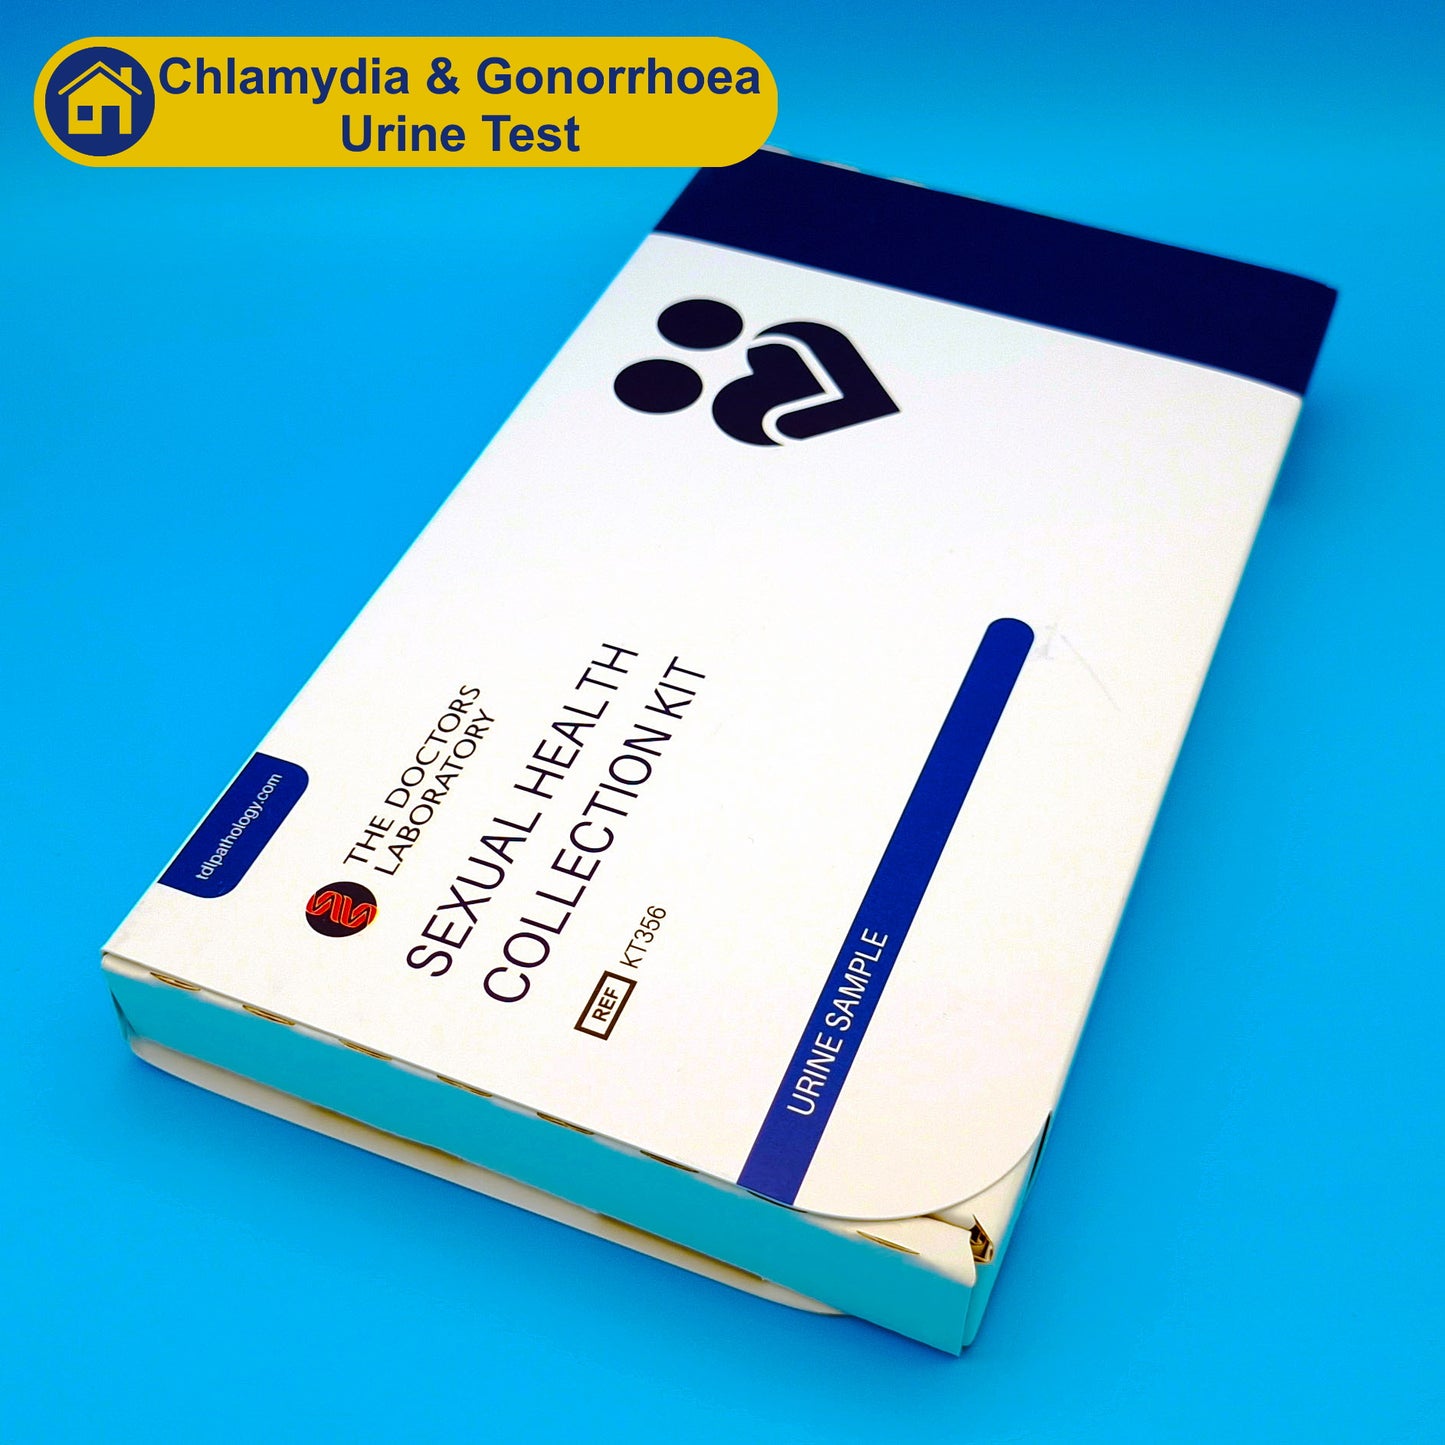 Home Chlamydia & Gonorrhoea Urine Test